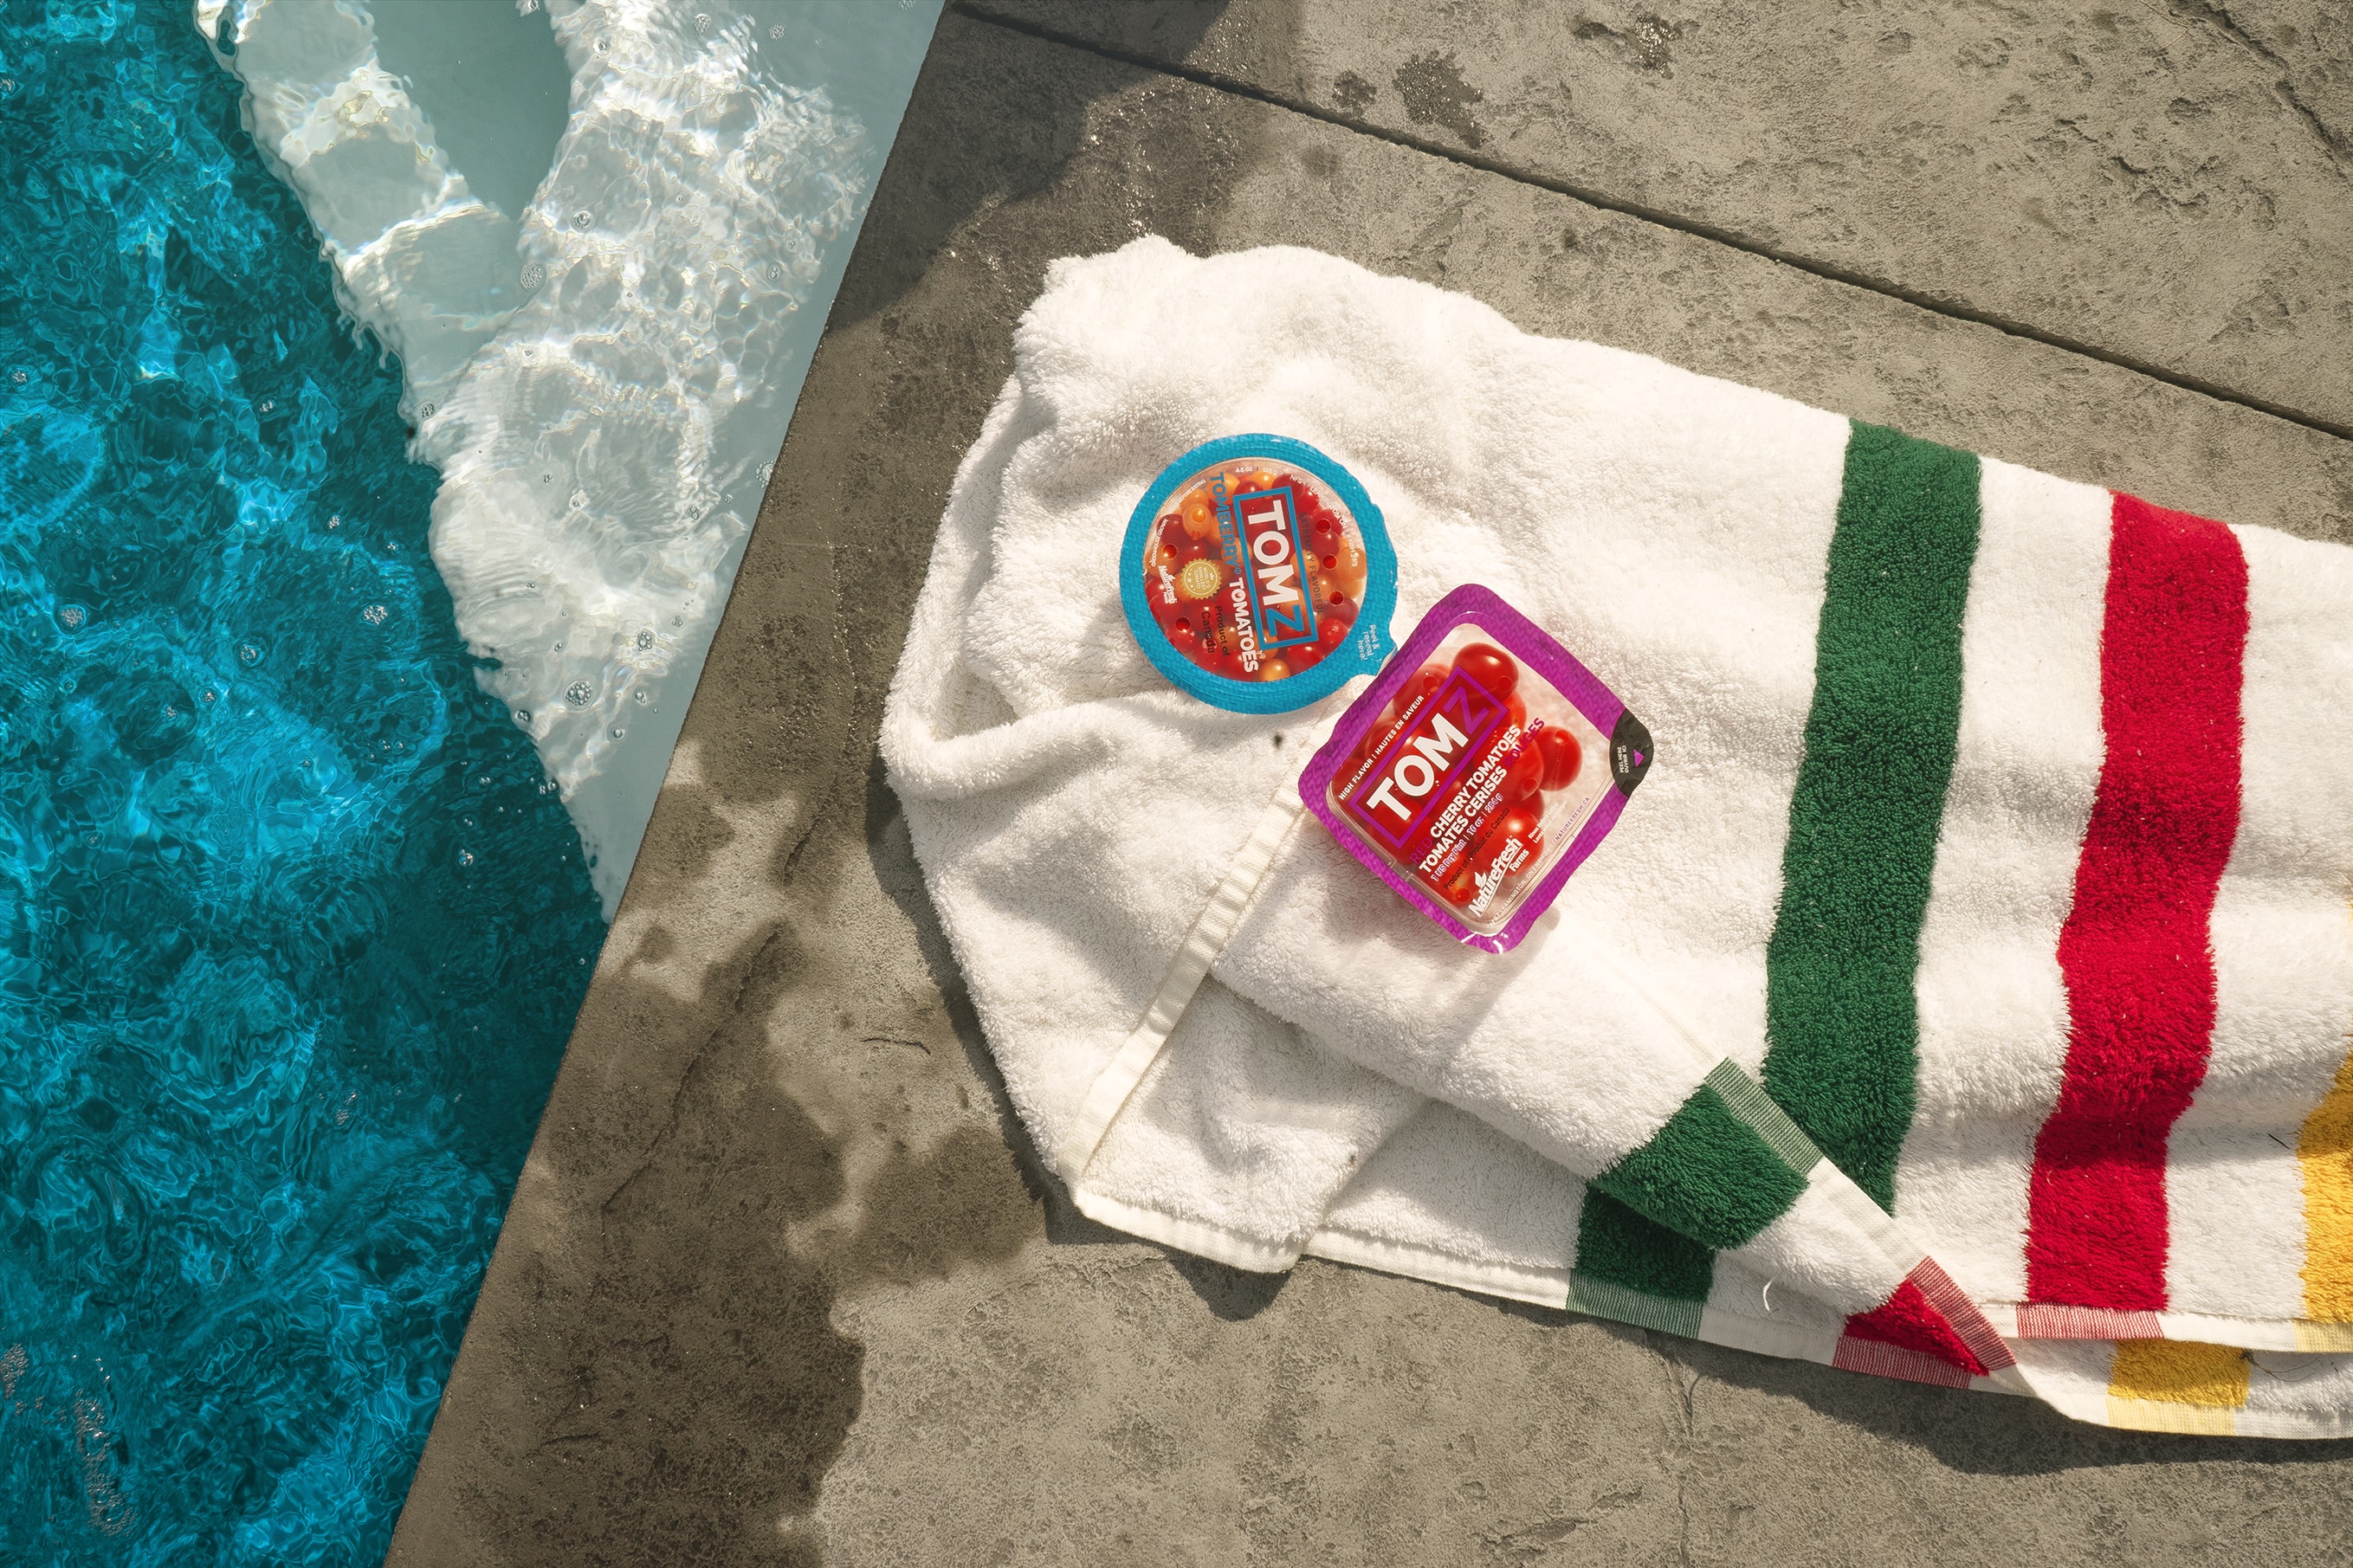 Tomberry Tomatoes on a towel beside a pool